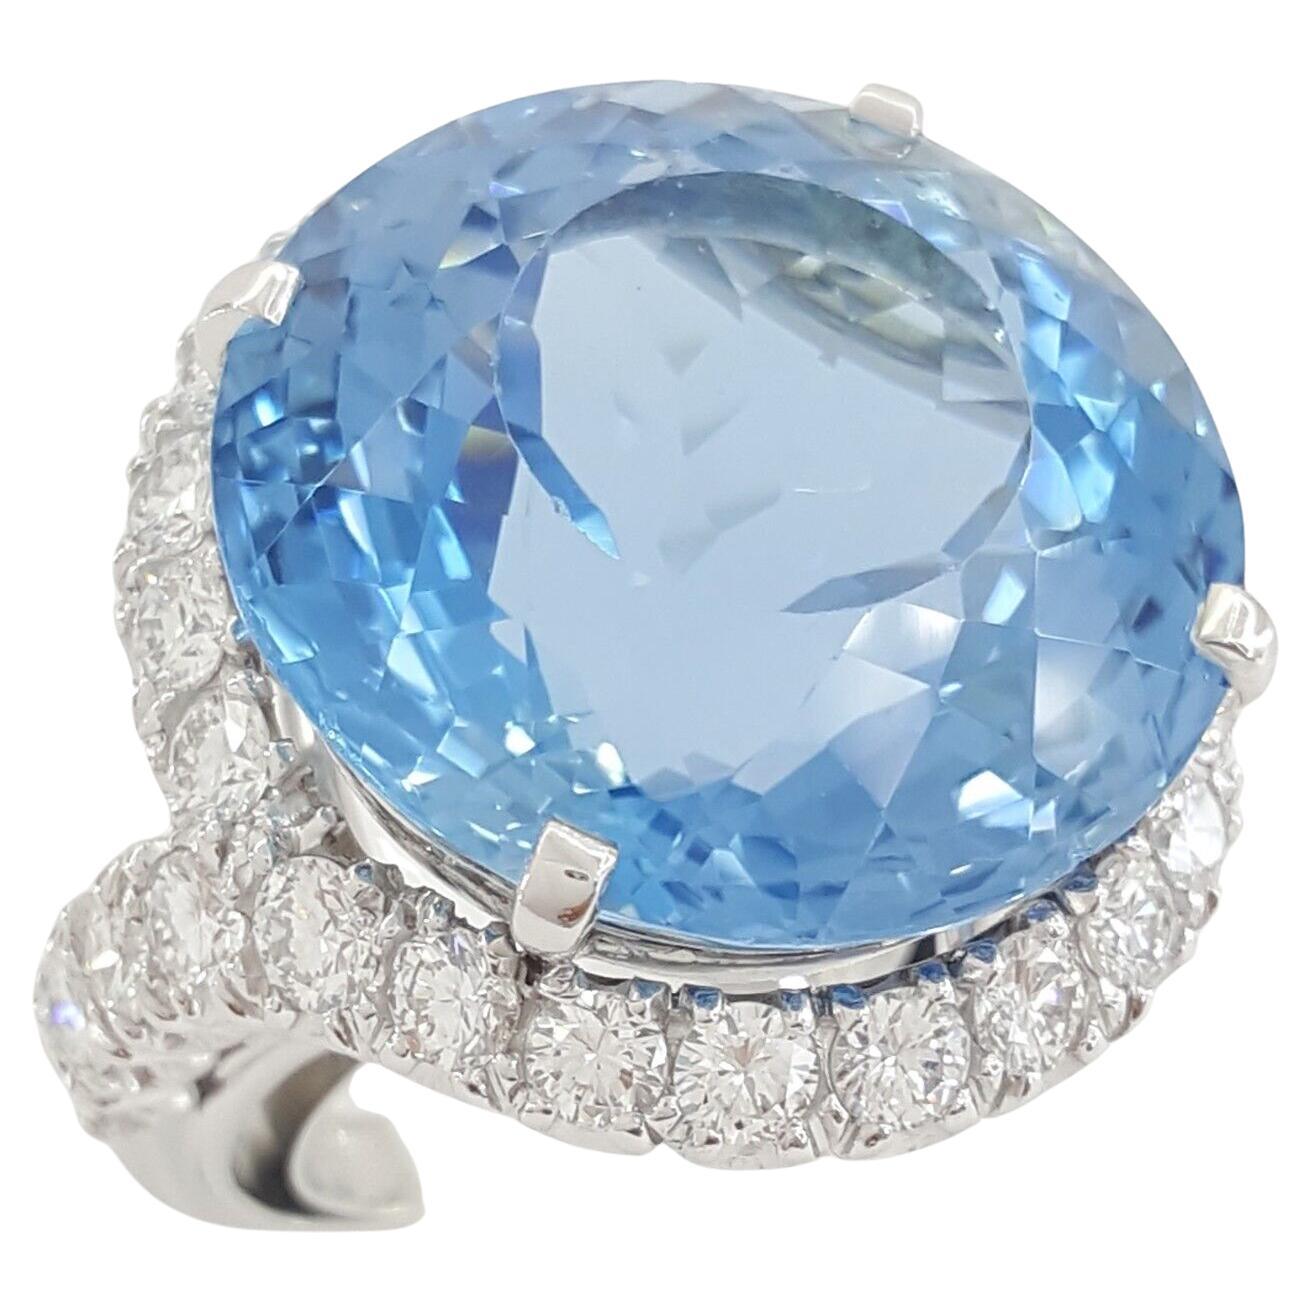 Round Cut Aquamarine & Round Cut Diamond Halo Engagement Statement/Cocktail Ring in Platinum.



The ring weighs 21.8 grams, size 4-6, the flex inner ring can be adjusted, the center stone is a Natural Most Desirable Aqua Blue Color Round Cut